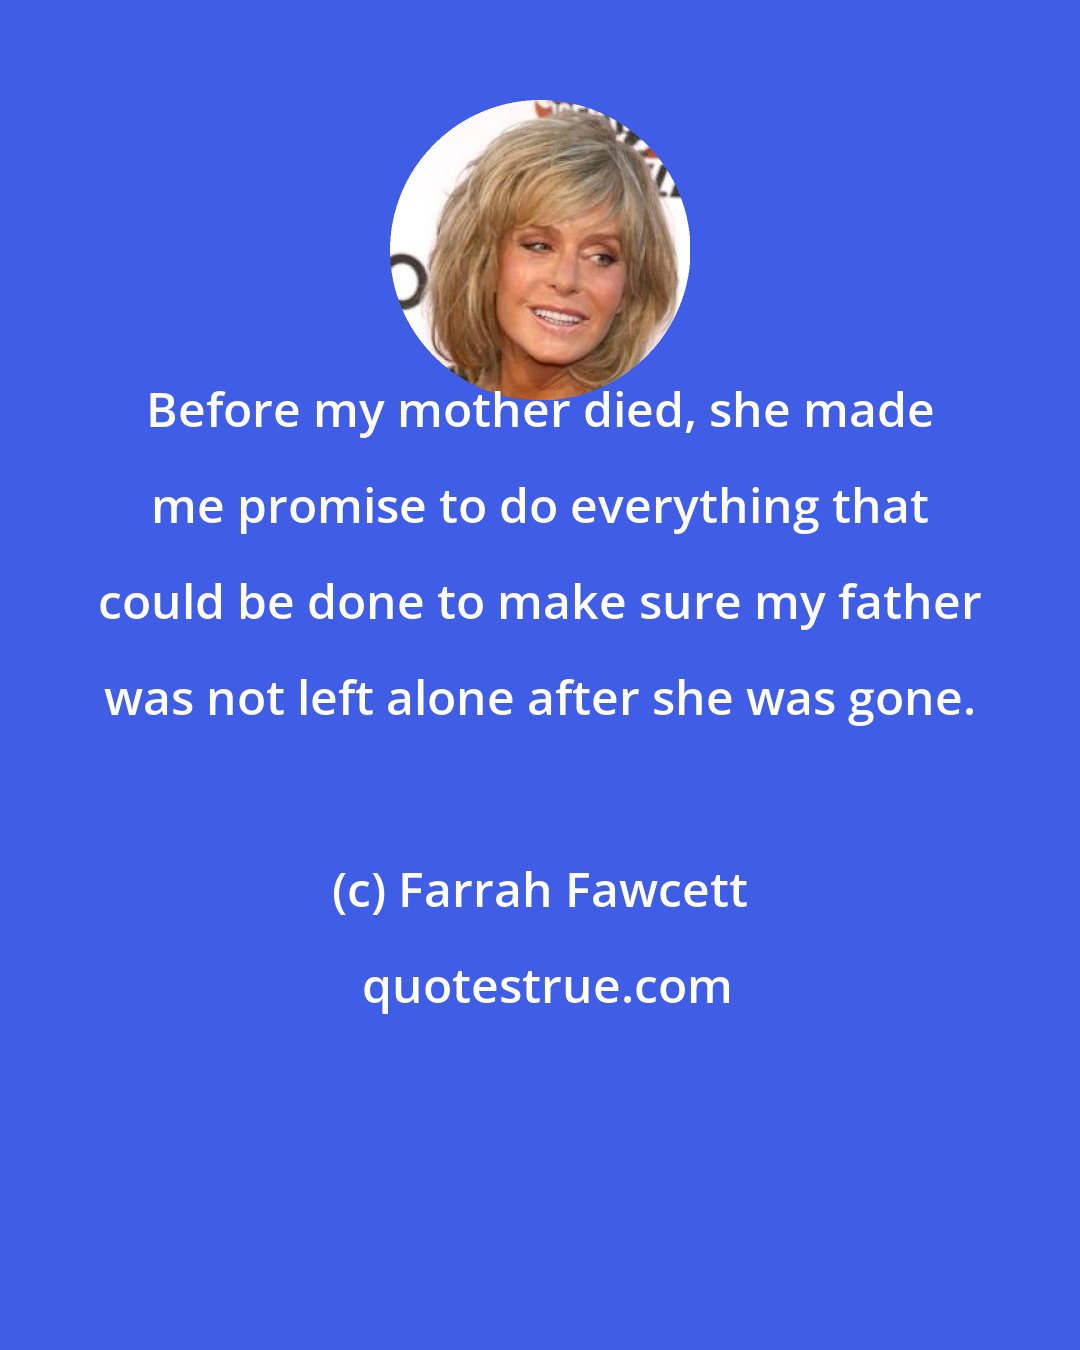 Farrah Fawcett: Before my mother died, she made me promise to do everything that could be done to make sure my father was not left alone after she was gone.